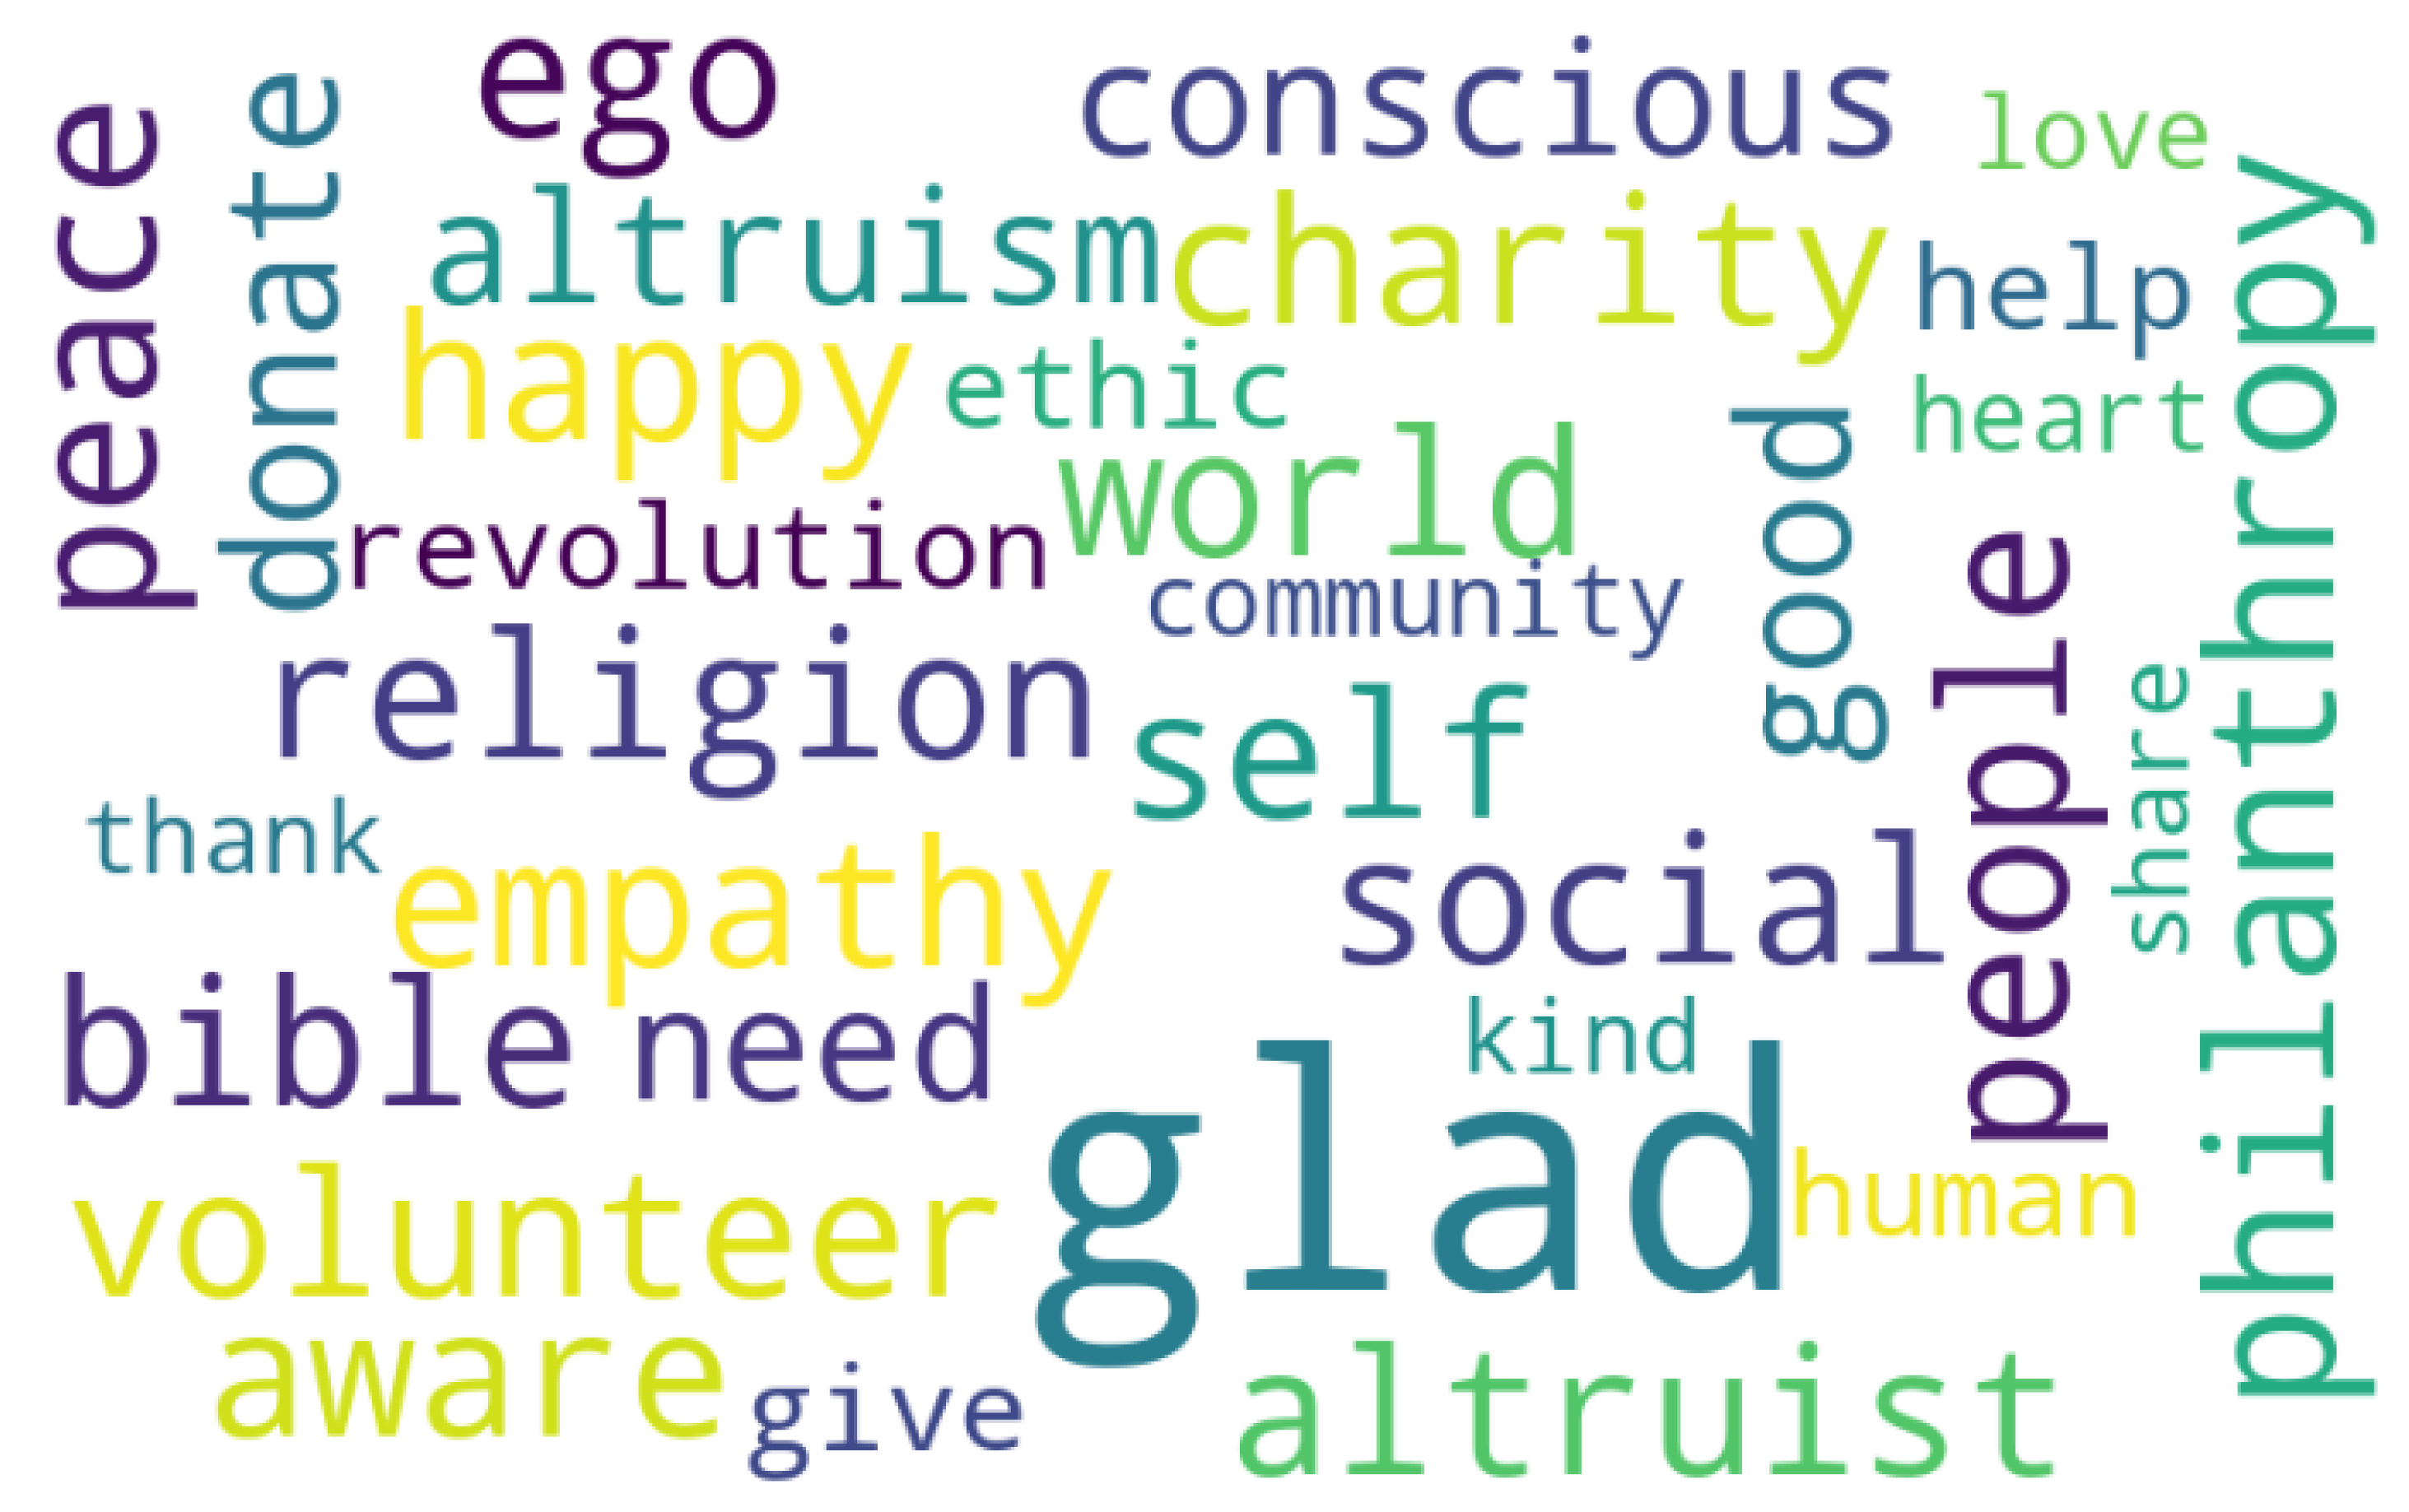 JRFM | Free Full-Text | The Crowdfunding of Altruism